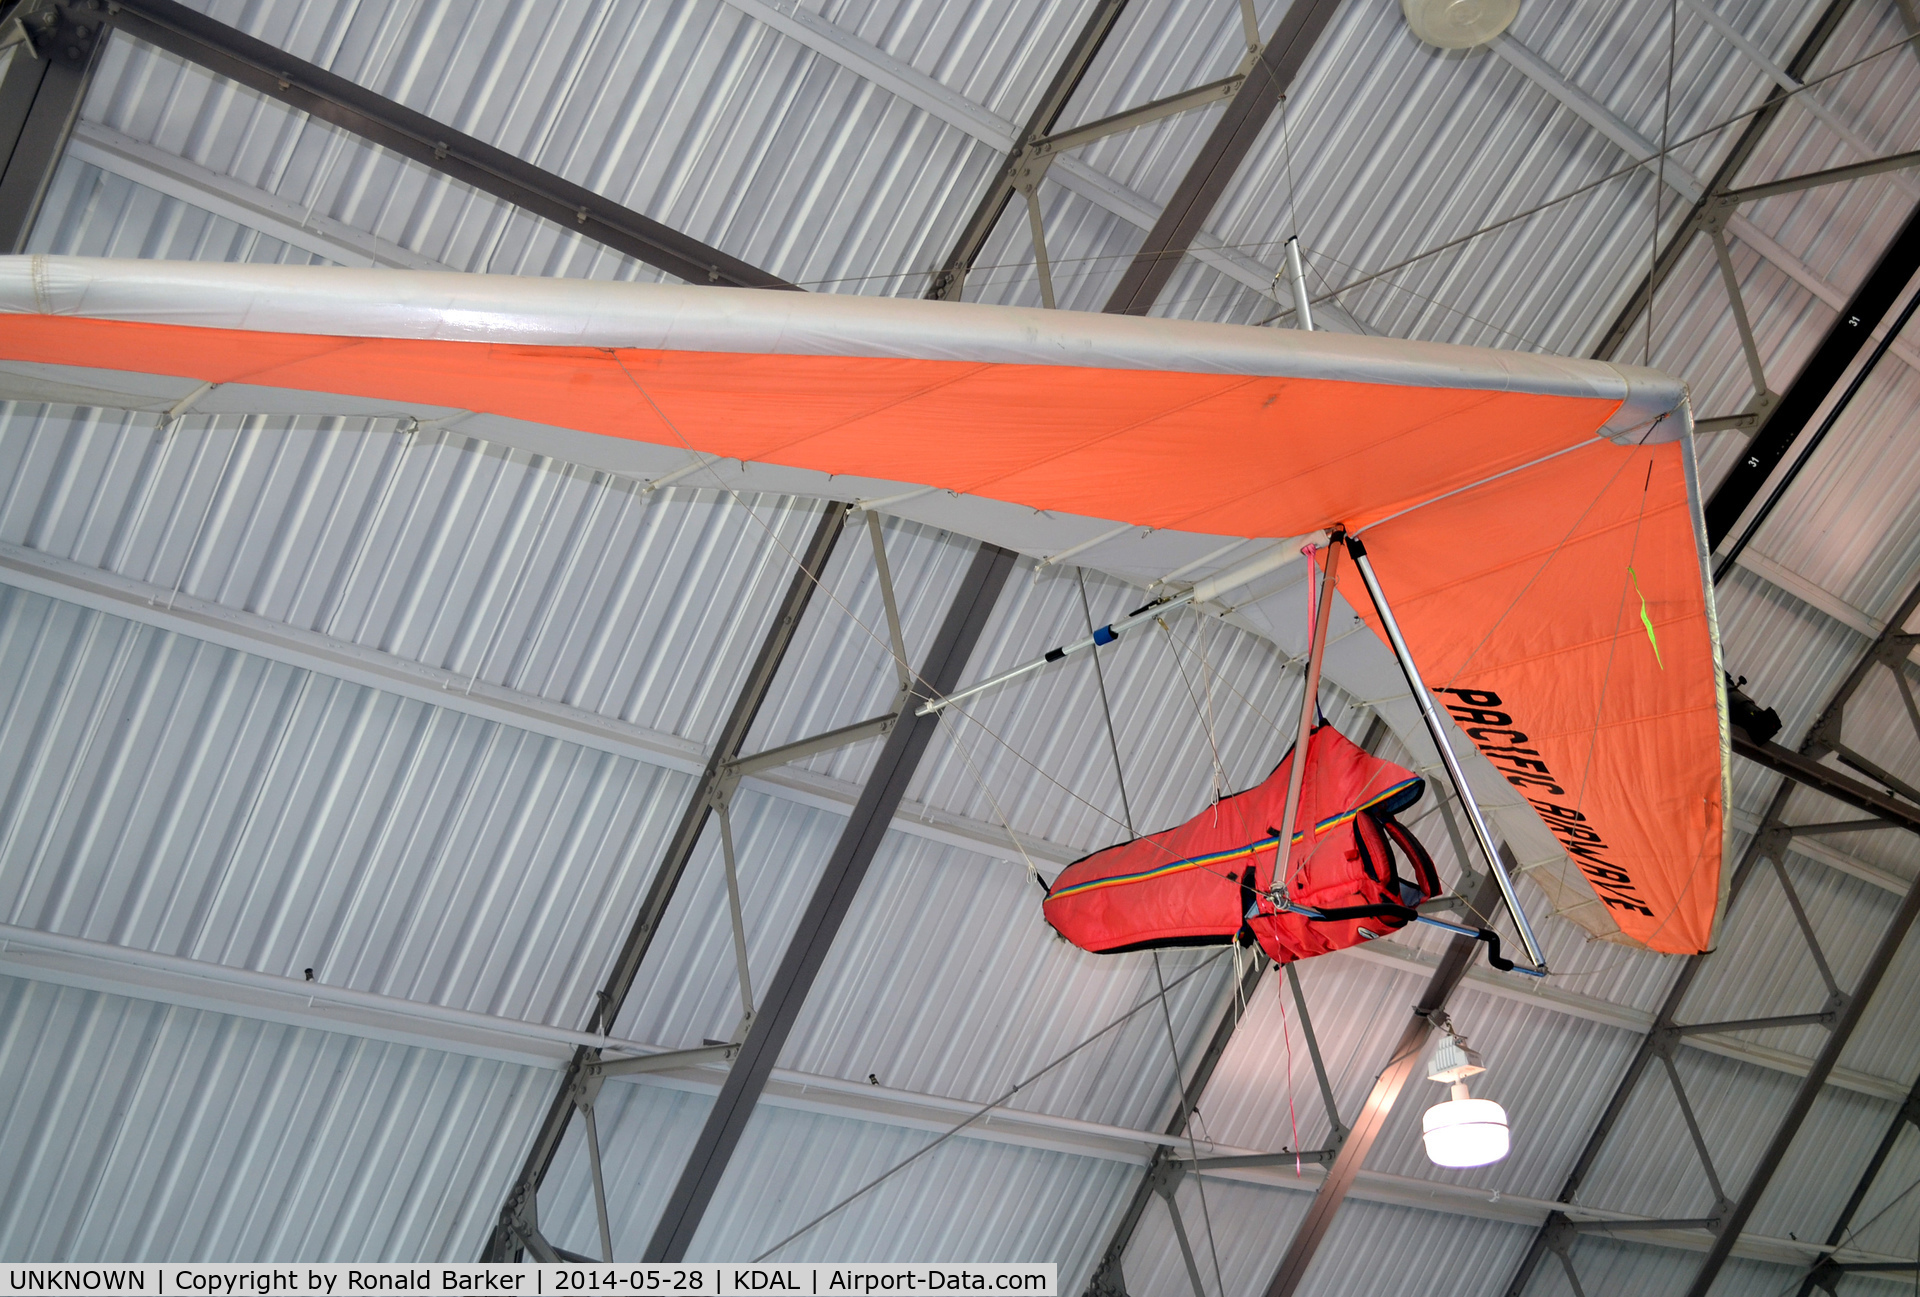 UNKNOWN, Ultralights various C/N Unknown, Pacific Airwave Hang Glider Frontiers of Flight Museum DAL